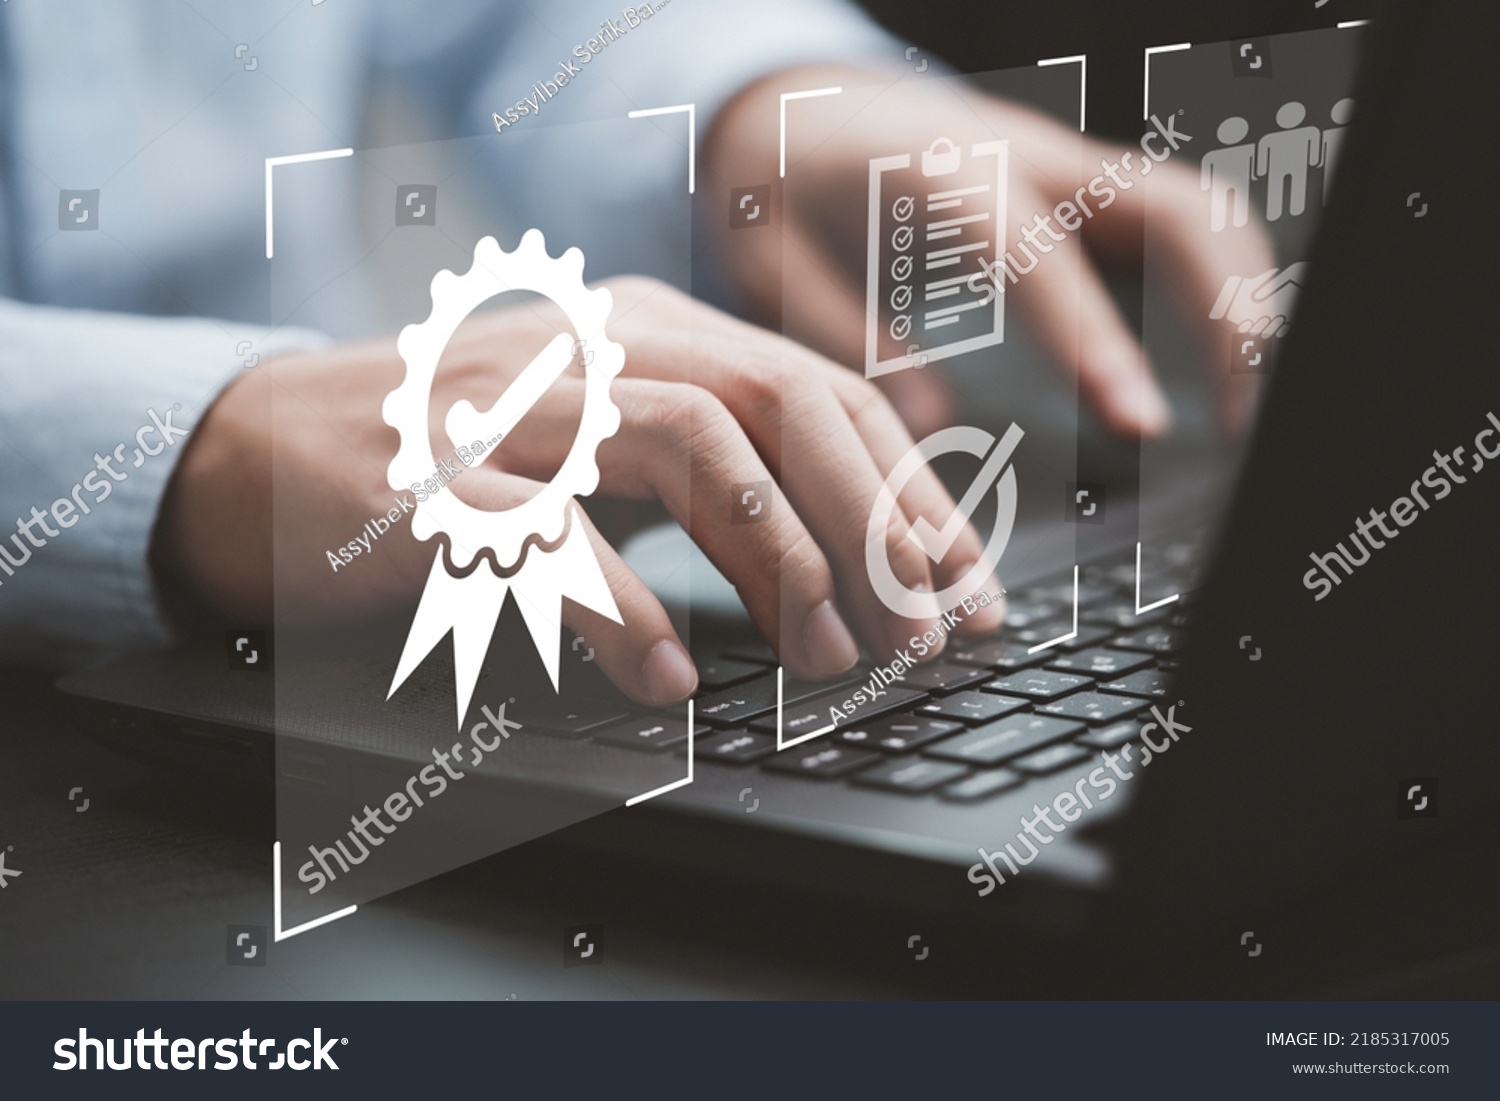 Businessman using laptop computer with quality assurance and document icon for ISO or International Standard Organisation which related quality control and continuous improvement concept. #2185317005